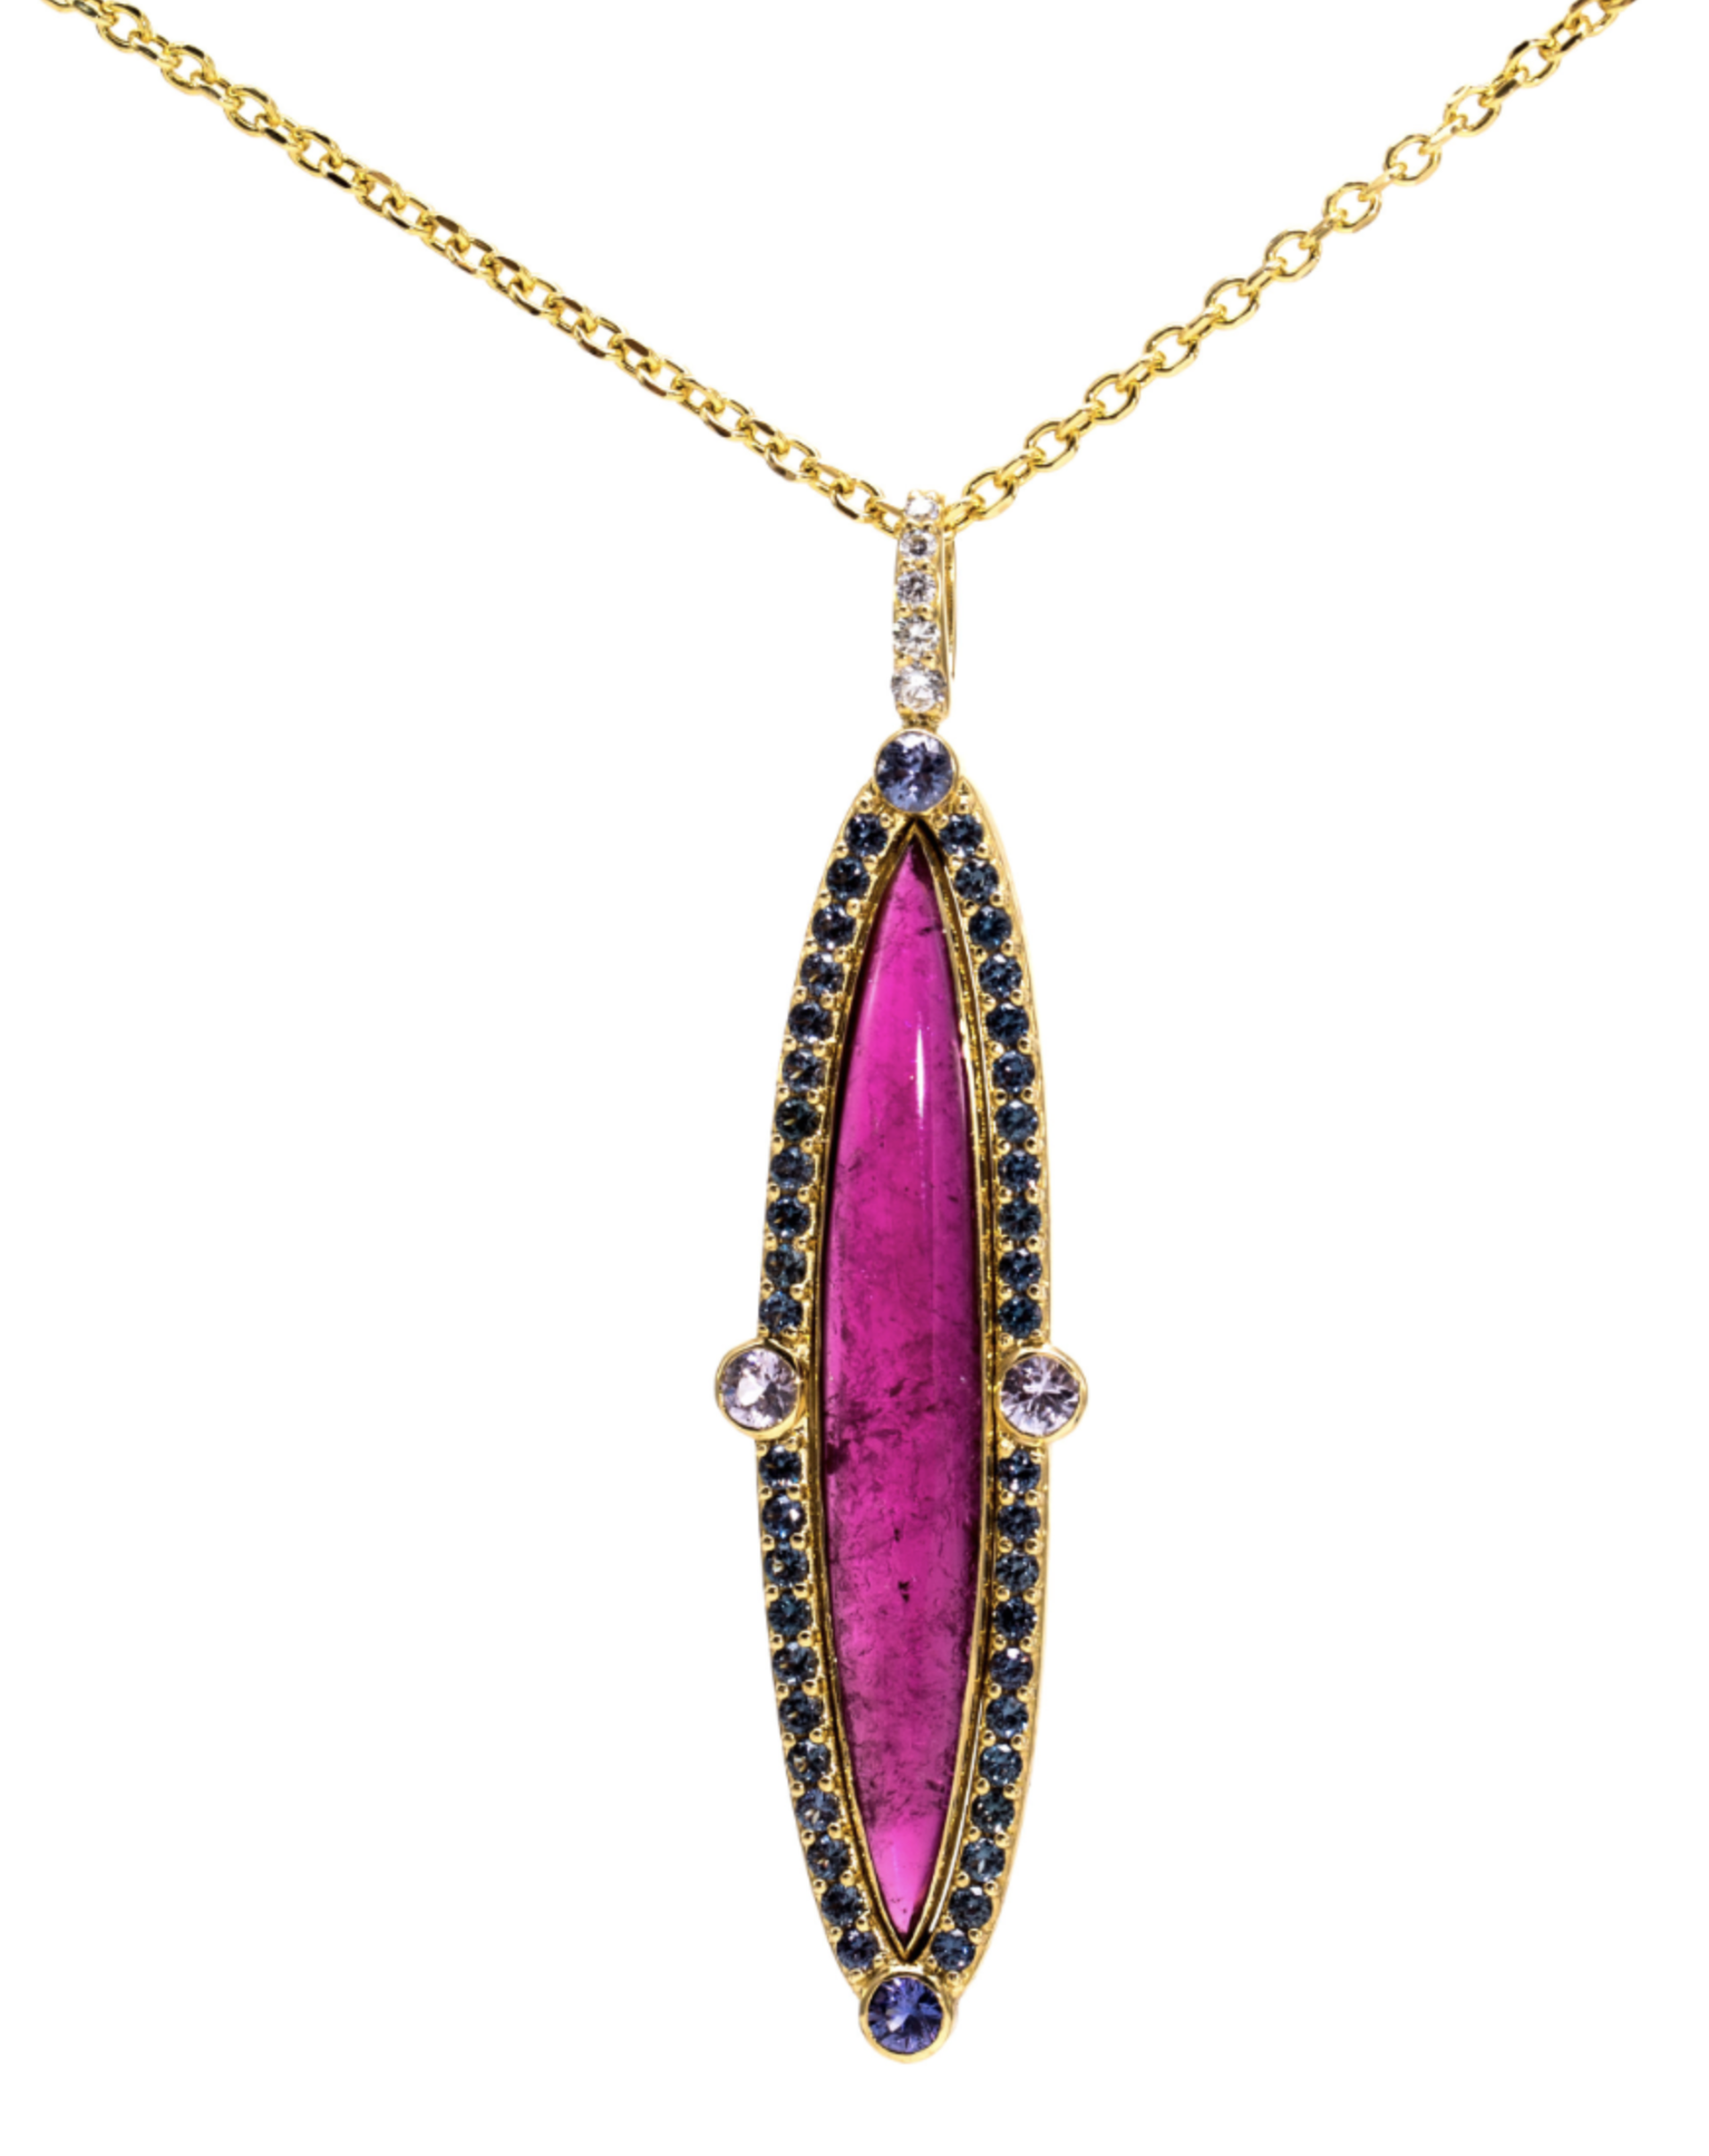 Raspberry Barret Necklace by Carley Jewels